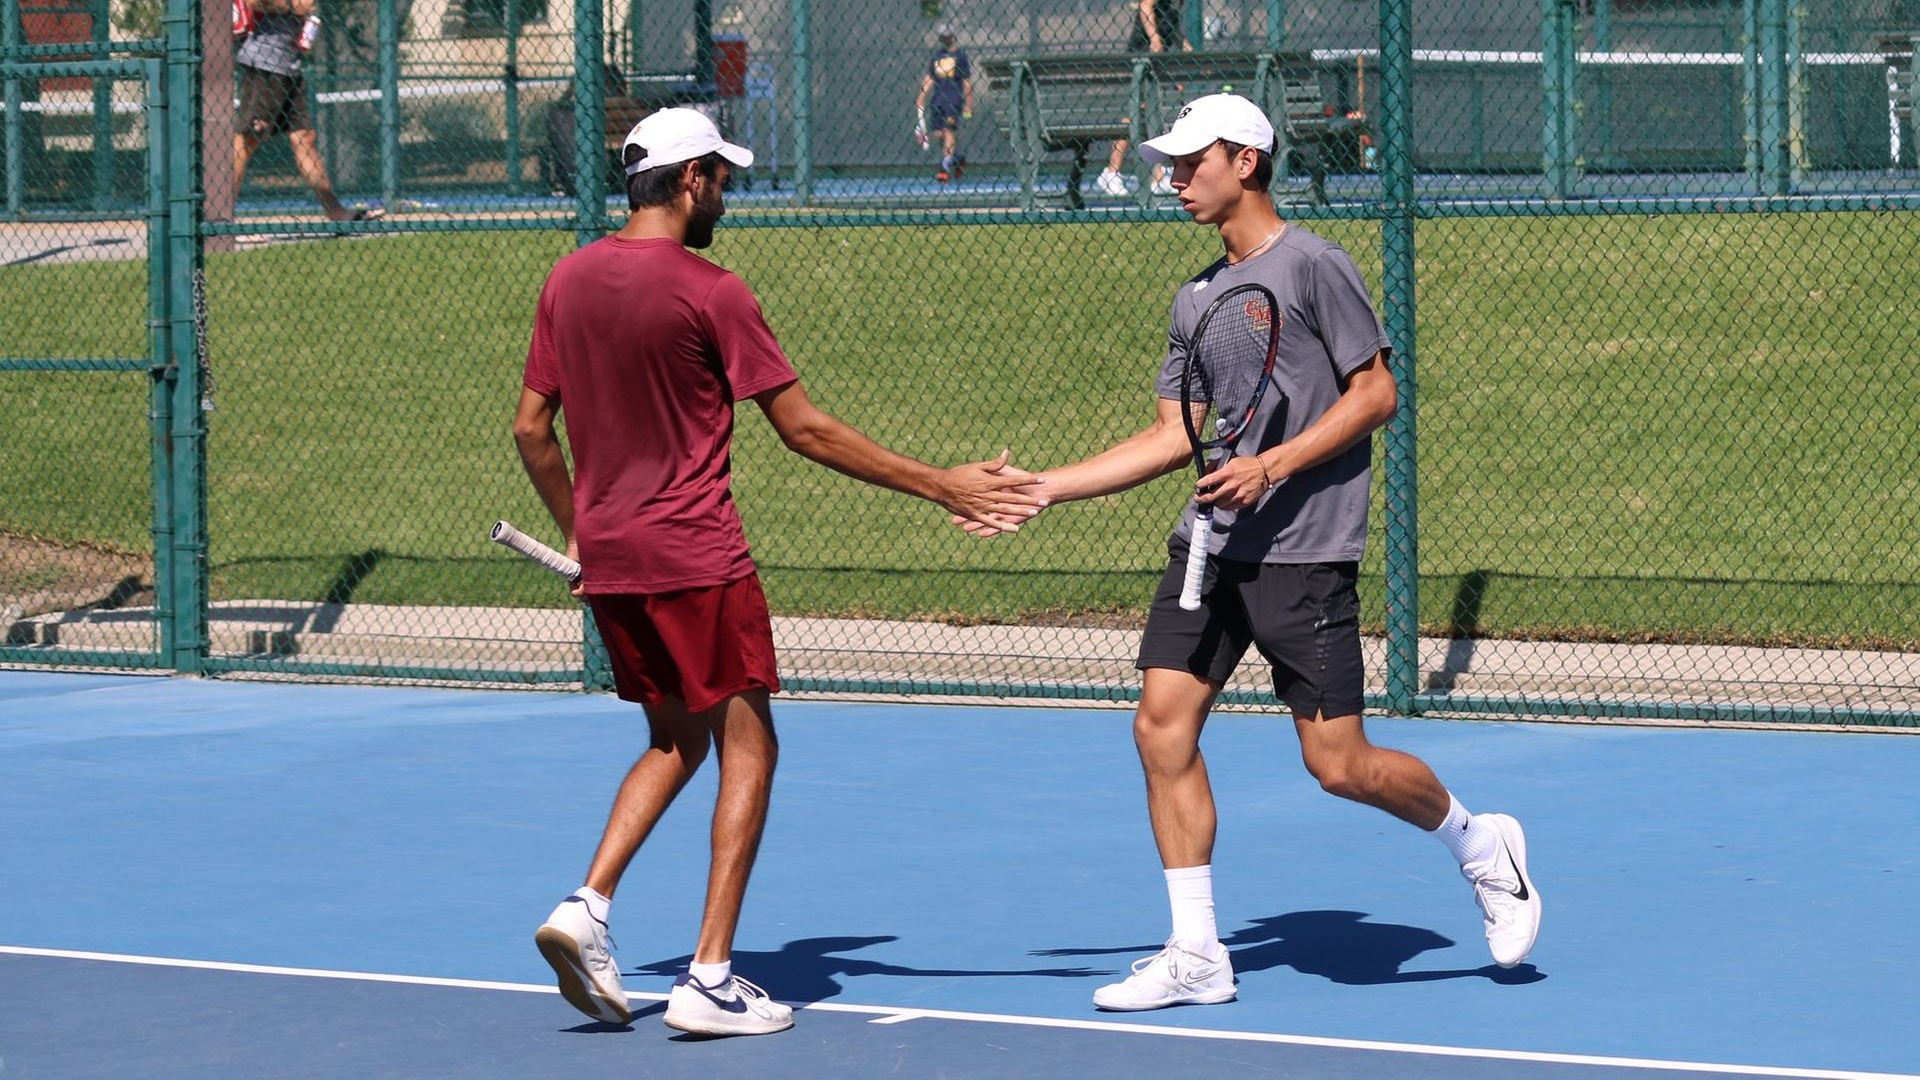 Nathan Arimilli (l) and Philip Martin (r) advanced through to the quarterfinals in doubles